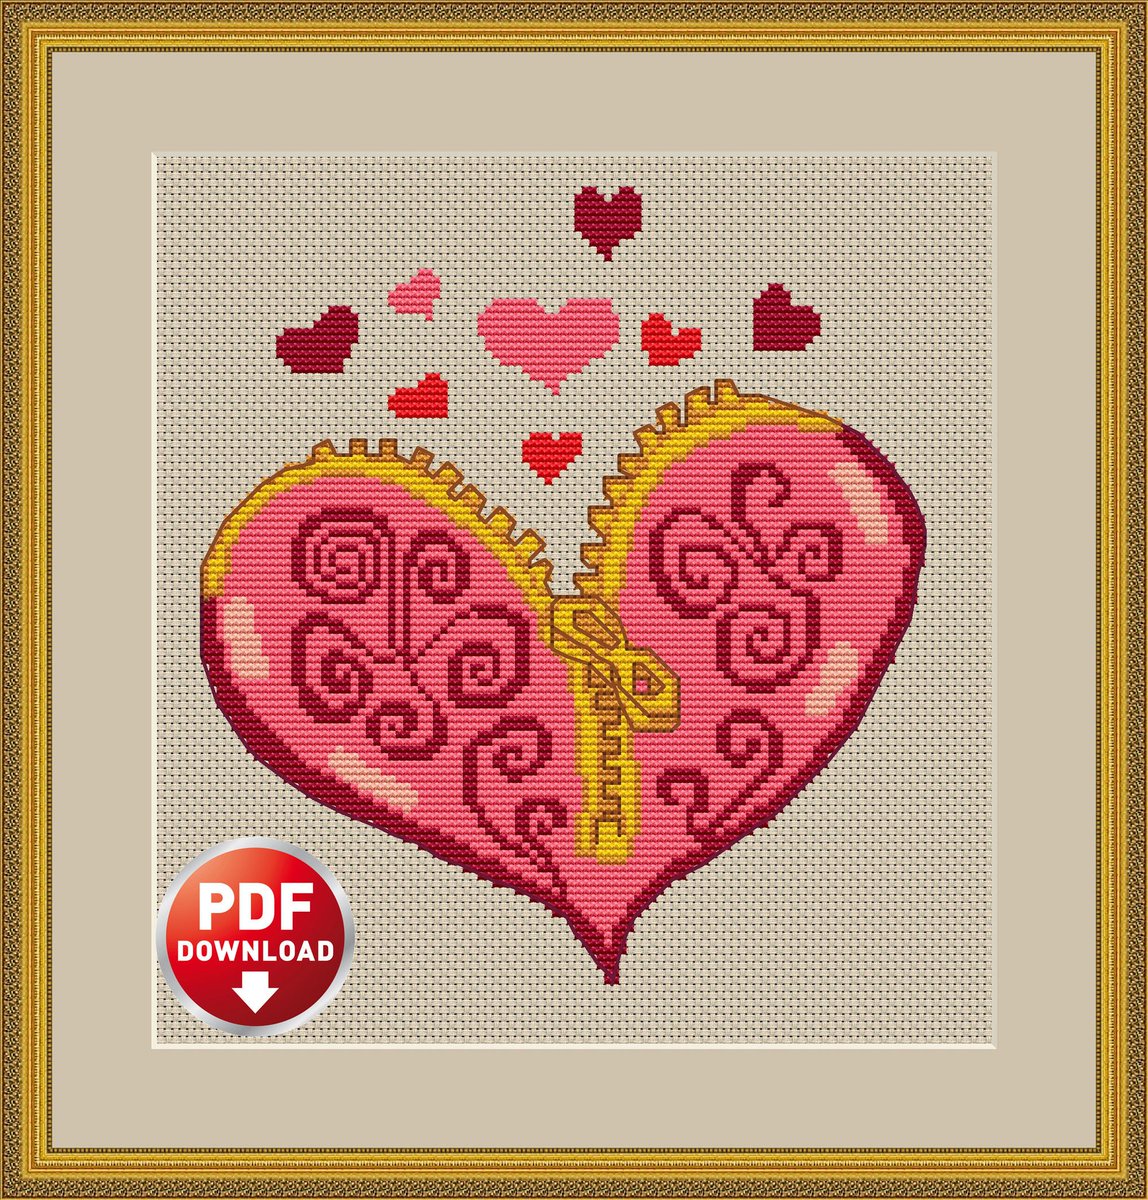 Excited to share the latest addition to my #etsy shop: Heart Cross Stitch Pattern Galentine's Day Card light embroidery PDF instant download etsy.me/3t4xxhw #anniversary #valentinesday #crossstitch #smallcrossstitch #crossstitchcard #heartcrossstitch #lovecross